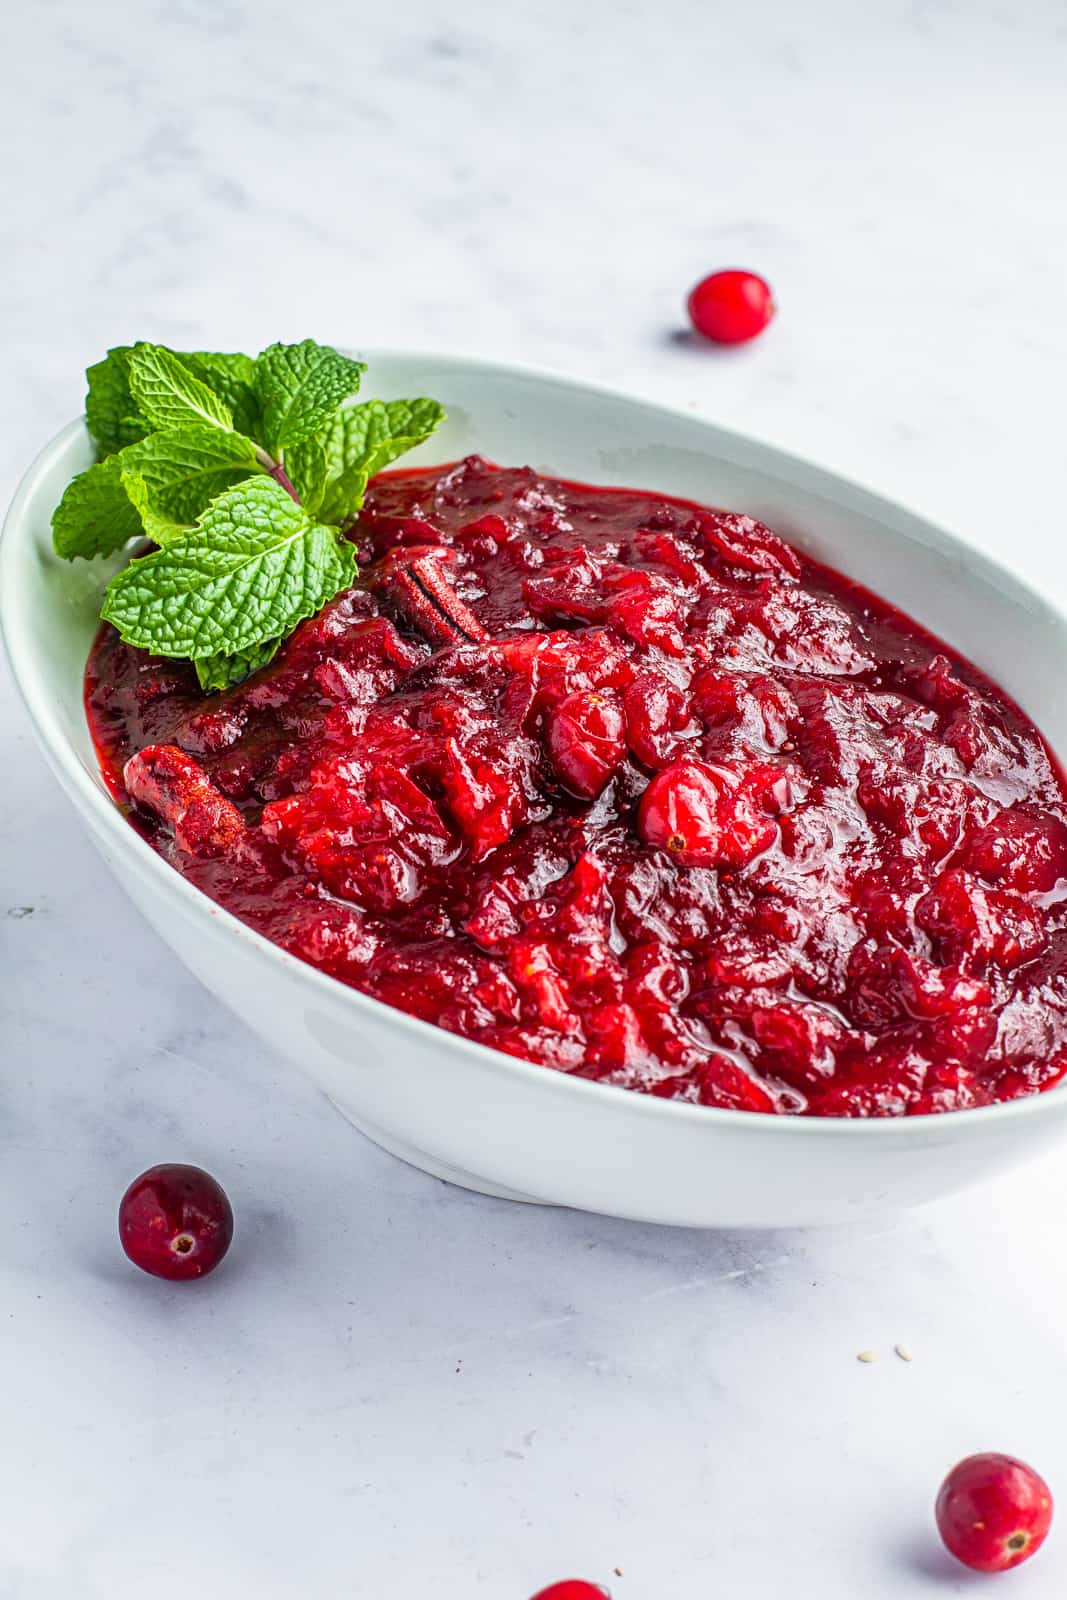 Cranberry sauce garnished with mint in a glass serving dish